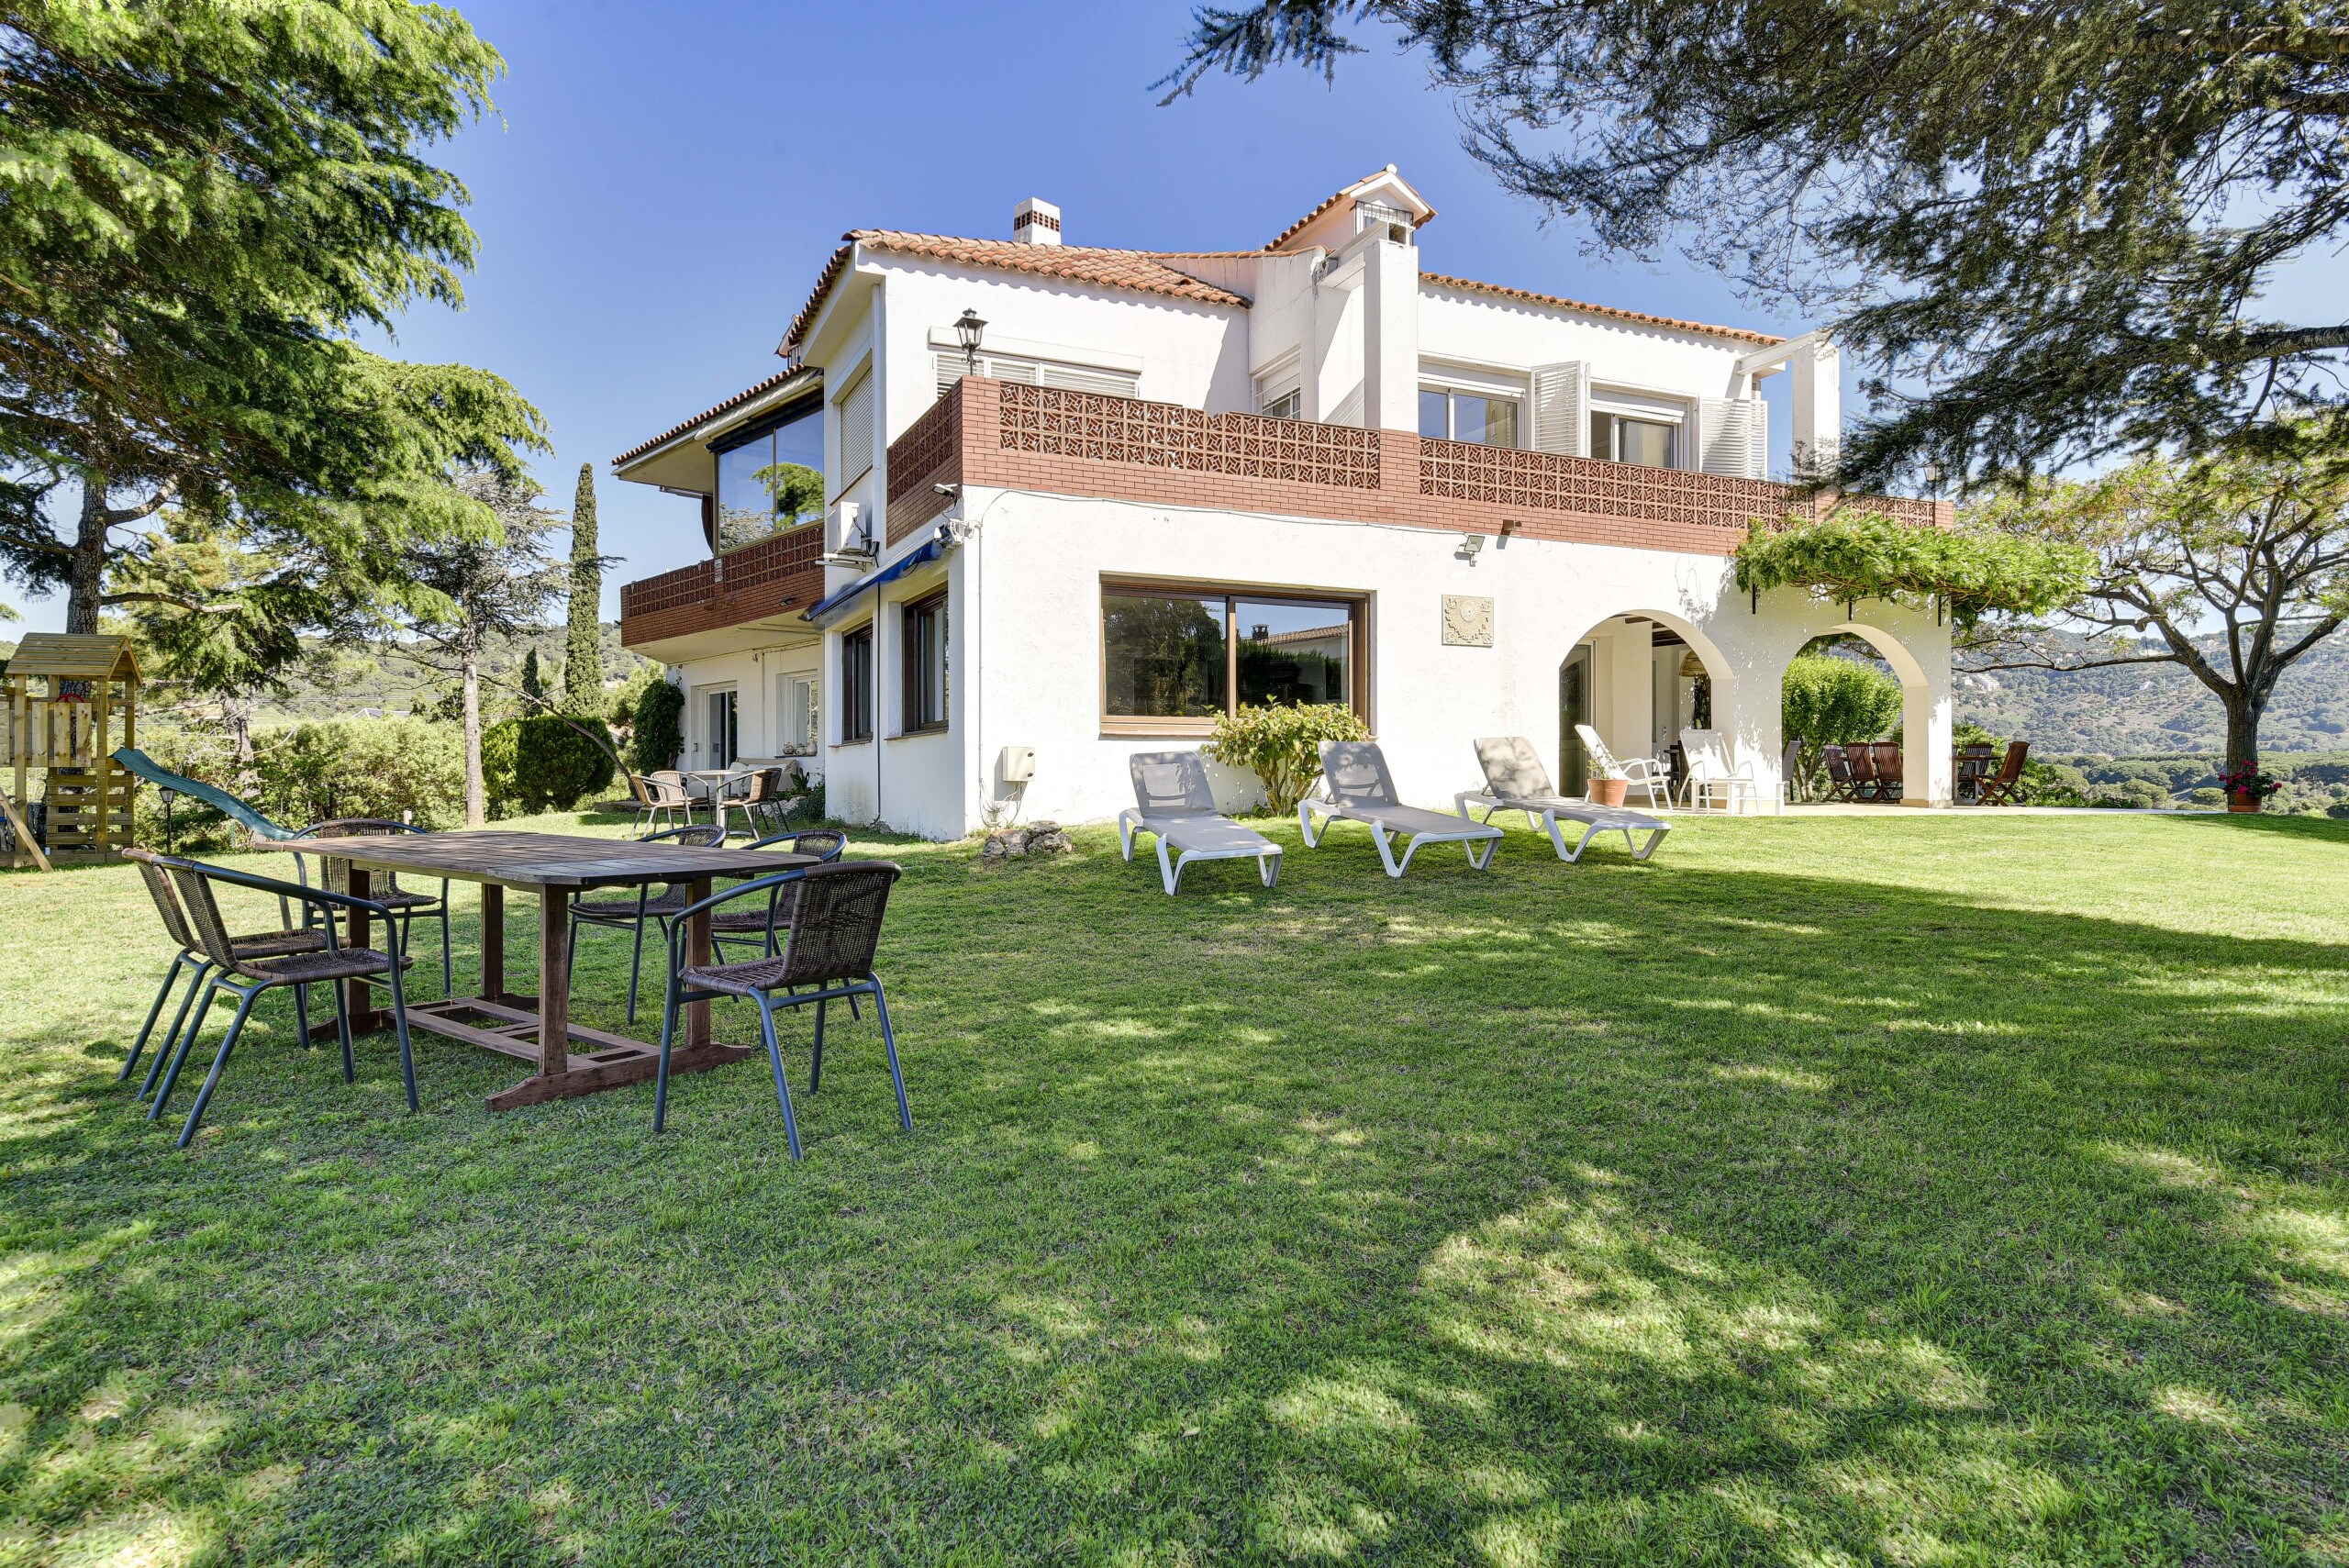 Property Image 2 - Amazing Spanish Villa with Spacious Living Space